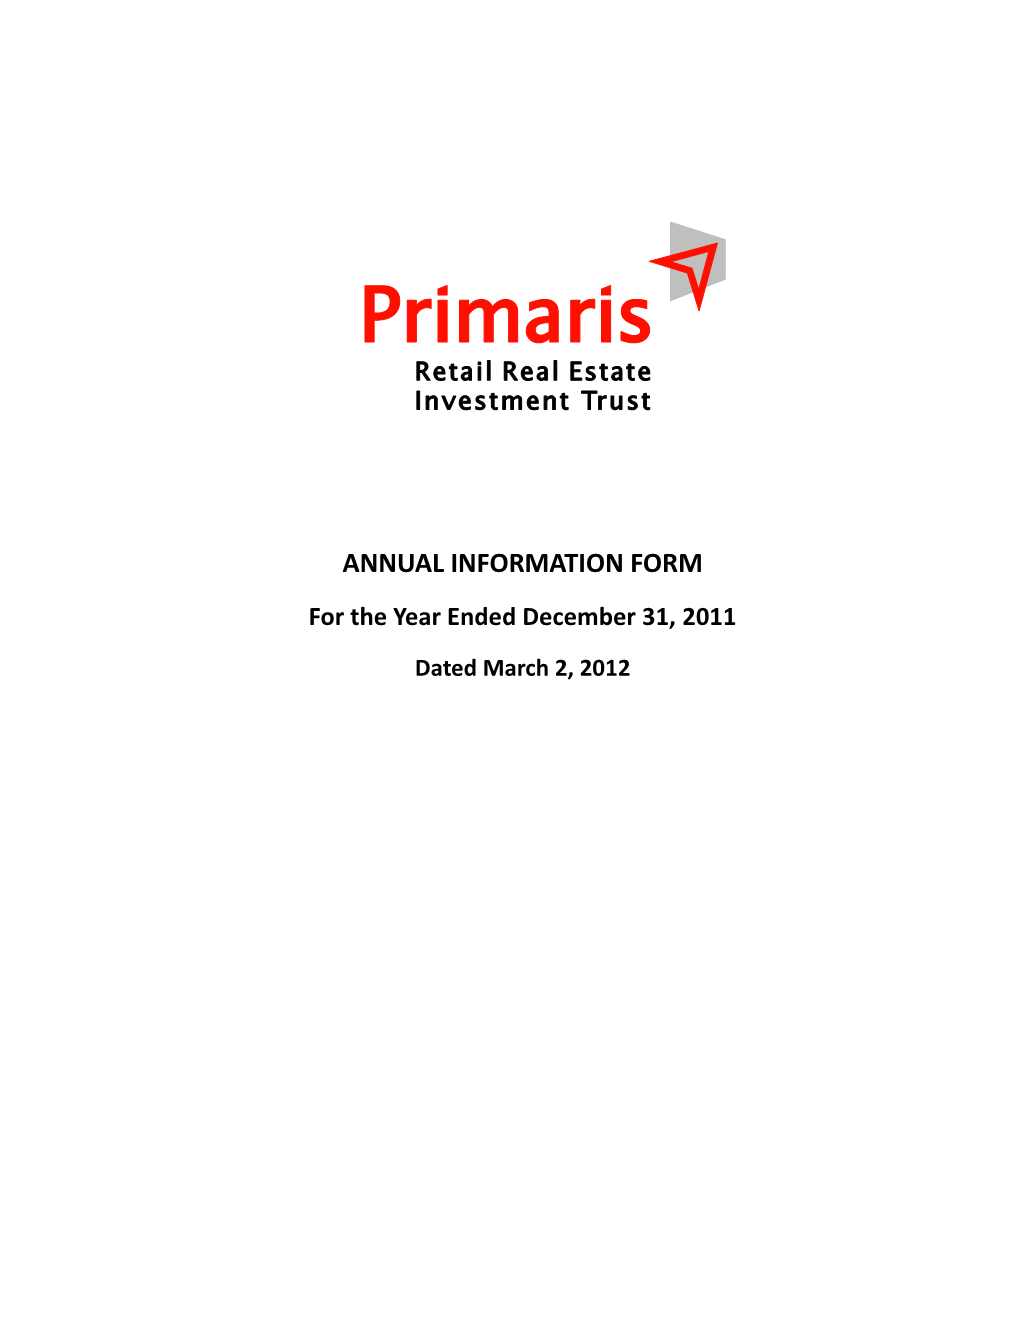 ANNUAL INFORMATION FORM for the Year Ended December 31, 2011